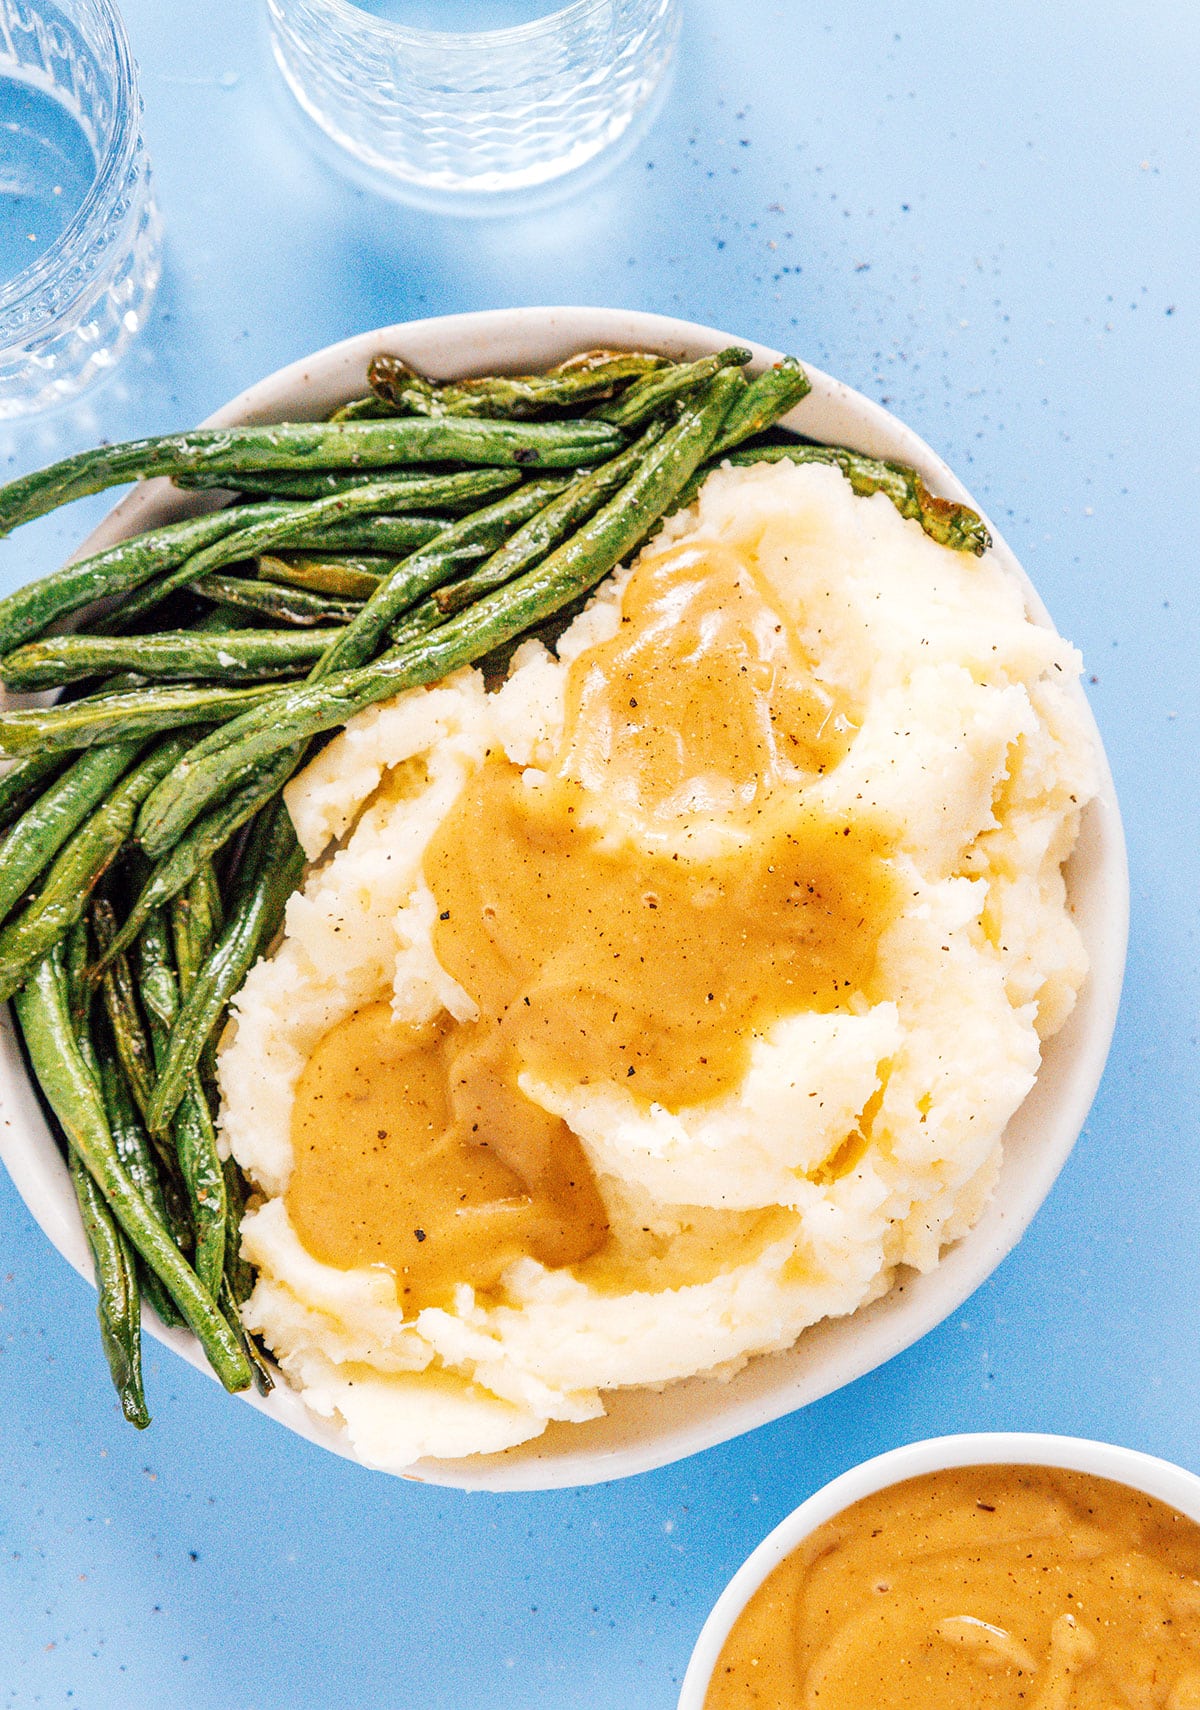 Mashed potatoes with green beans and gravy on top.